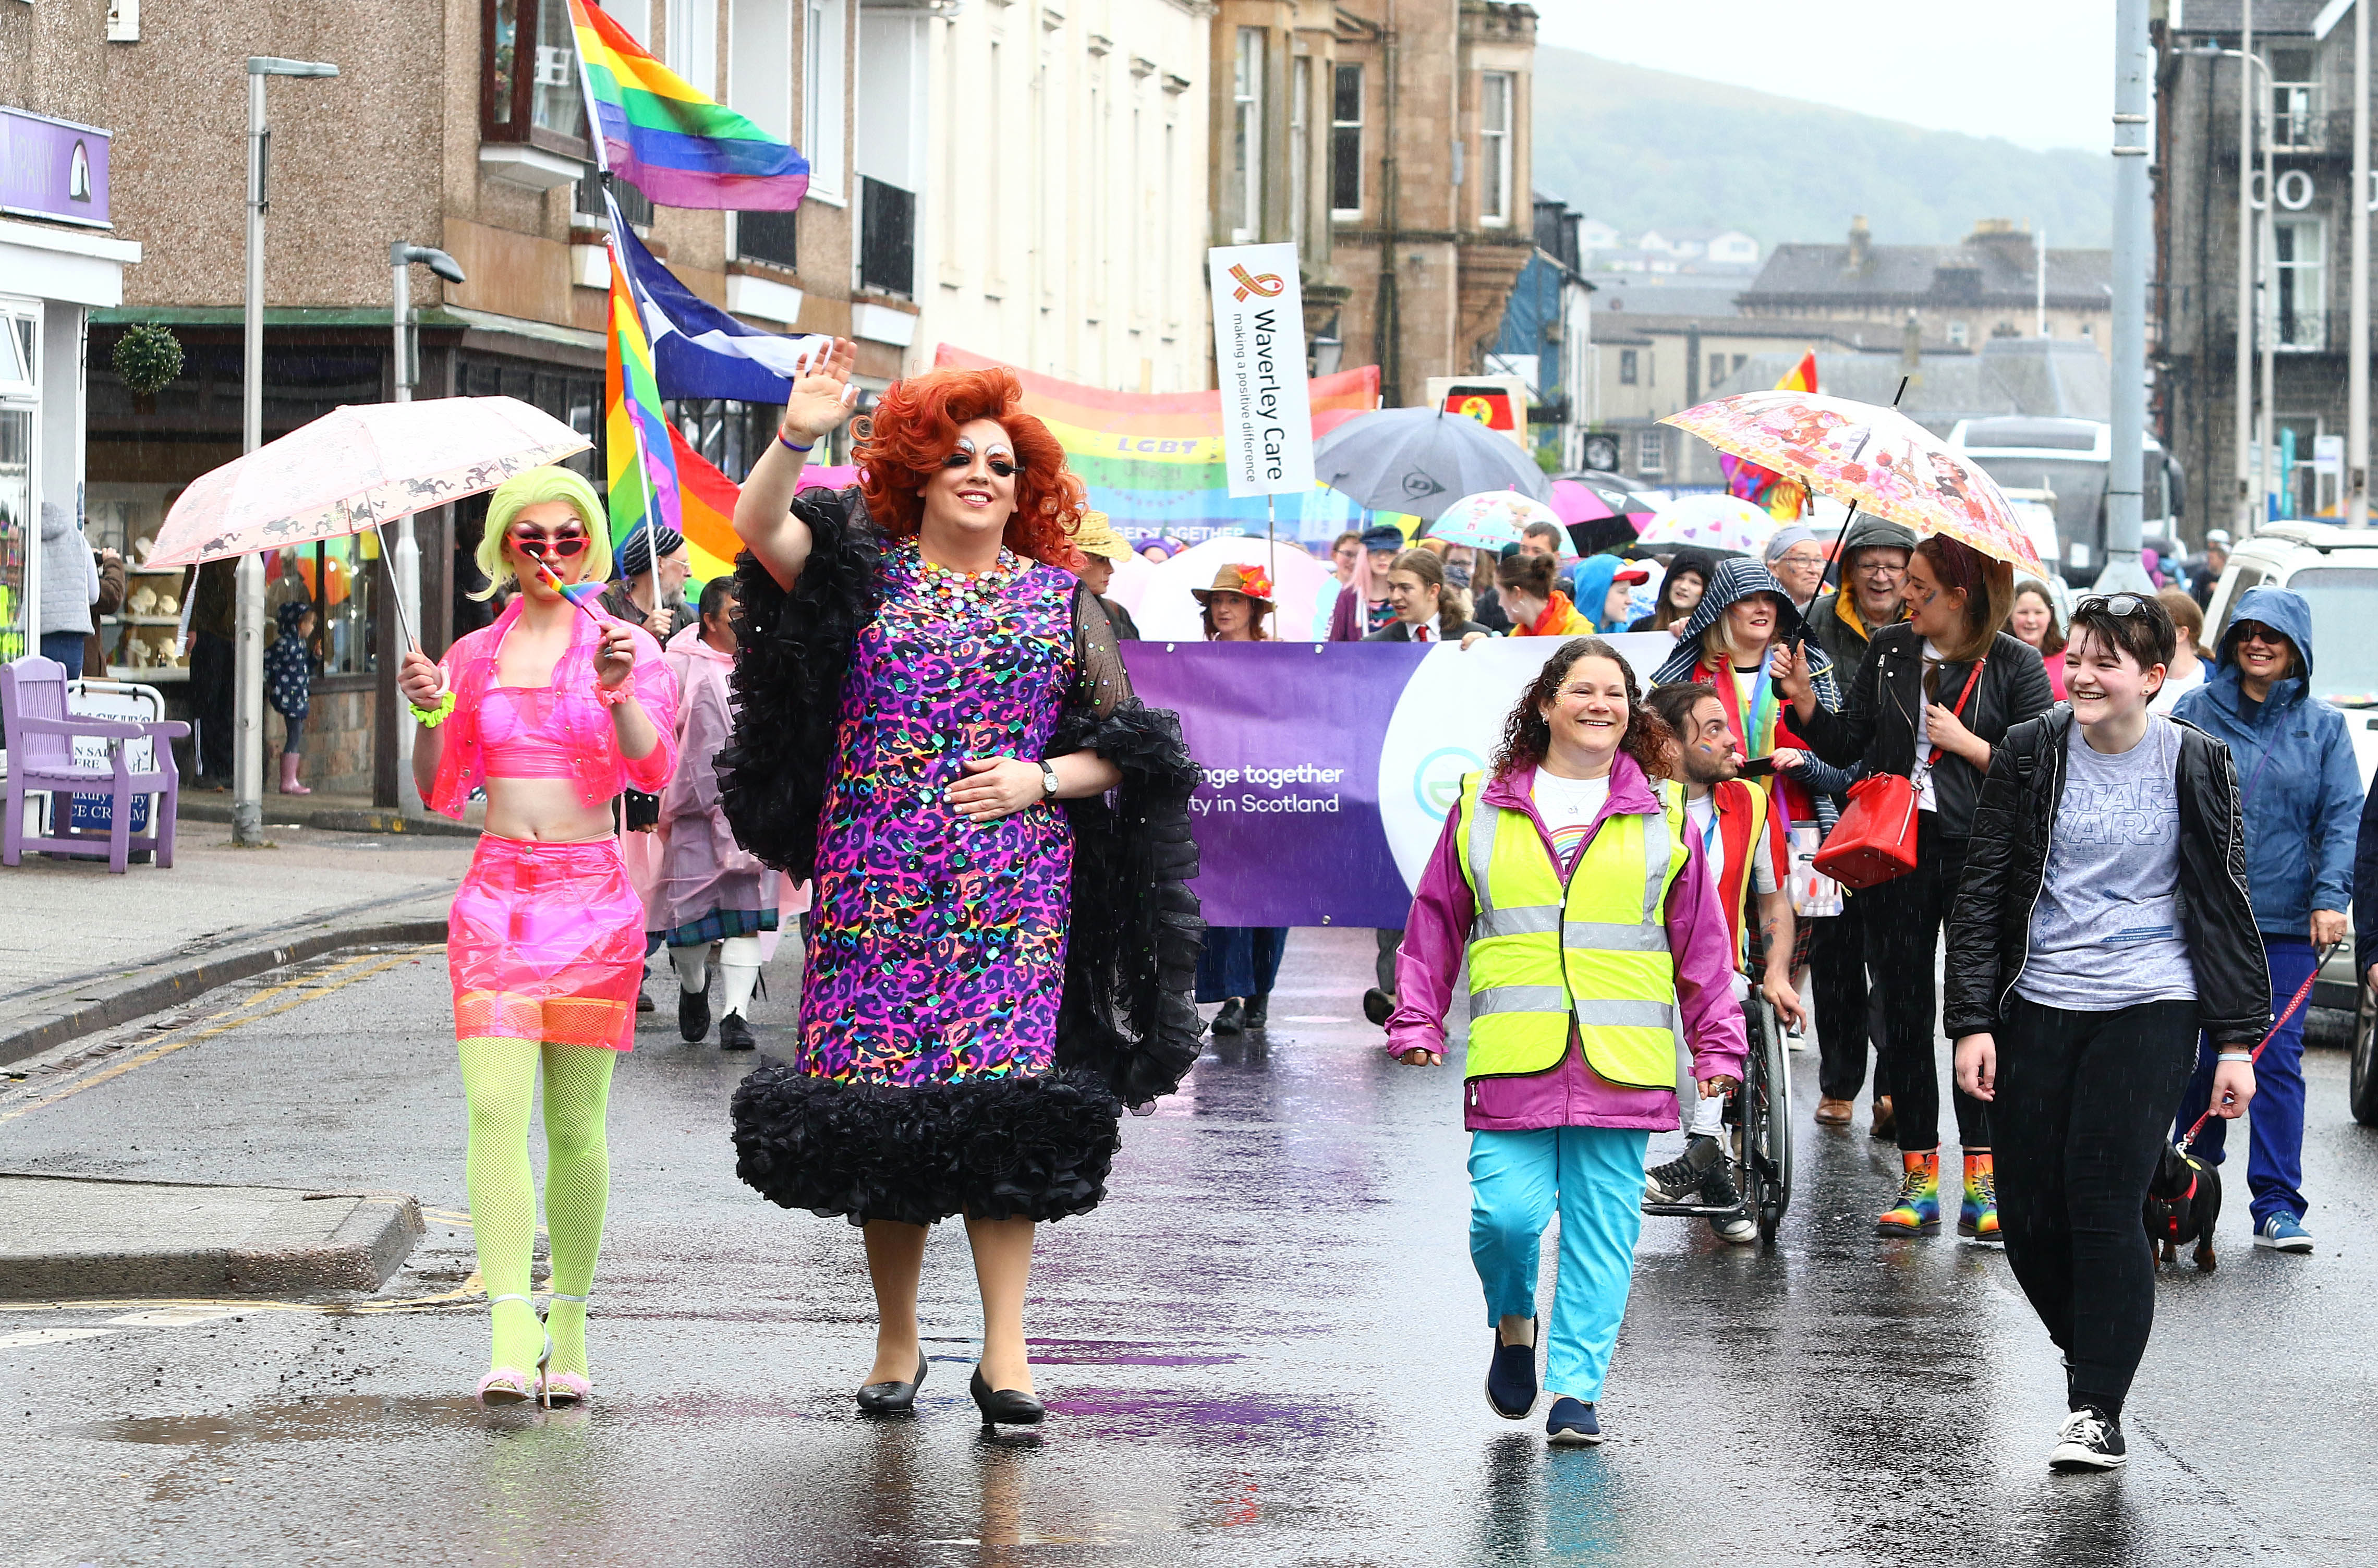 Dahlia Black and Crystal lead the pride parade along the esplanade in Oban. 
Picture: Kevin McGlynn